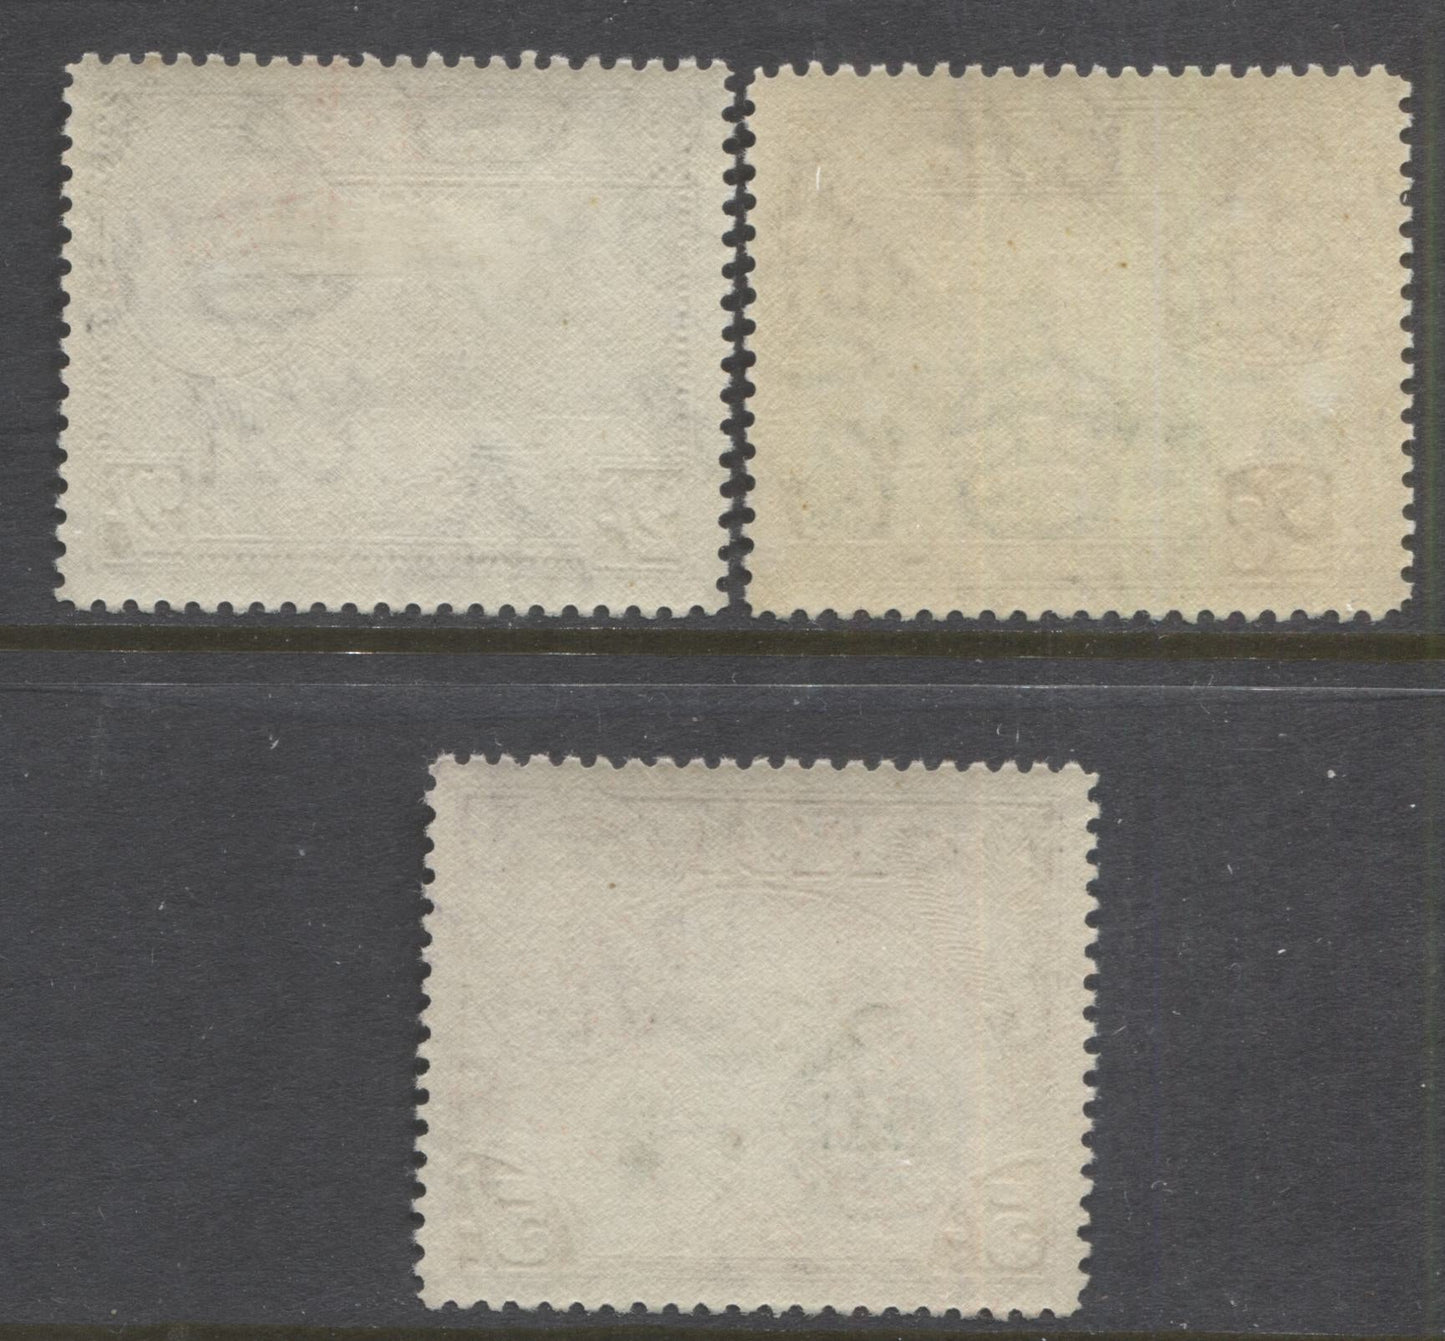 Lot 90 Fiji SG#264-266 1938-1952 Pictorial Definitive Issue, a VFNH Partial Set From 2/- to 5/-, Wartime Printings, SG. Cat 16.25 GBP = $27.95